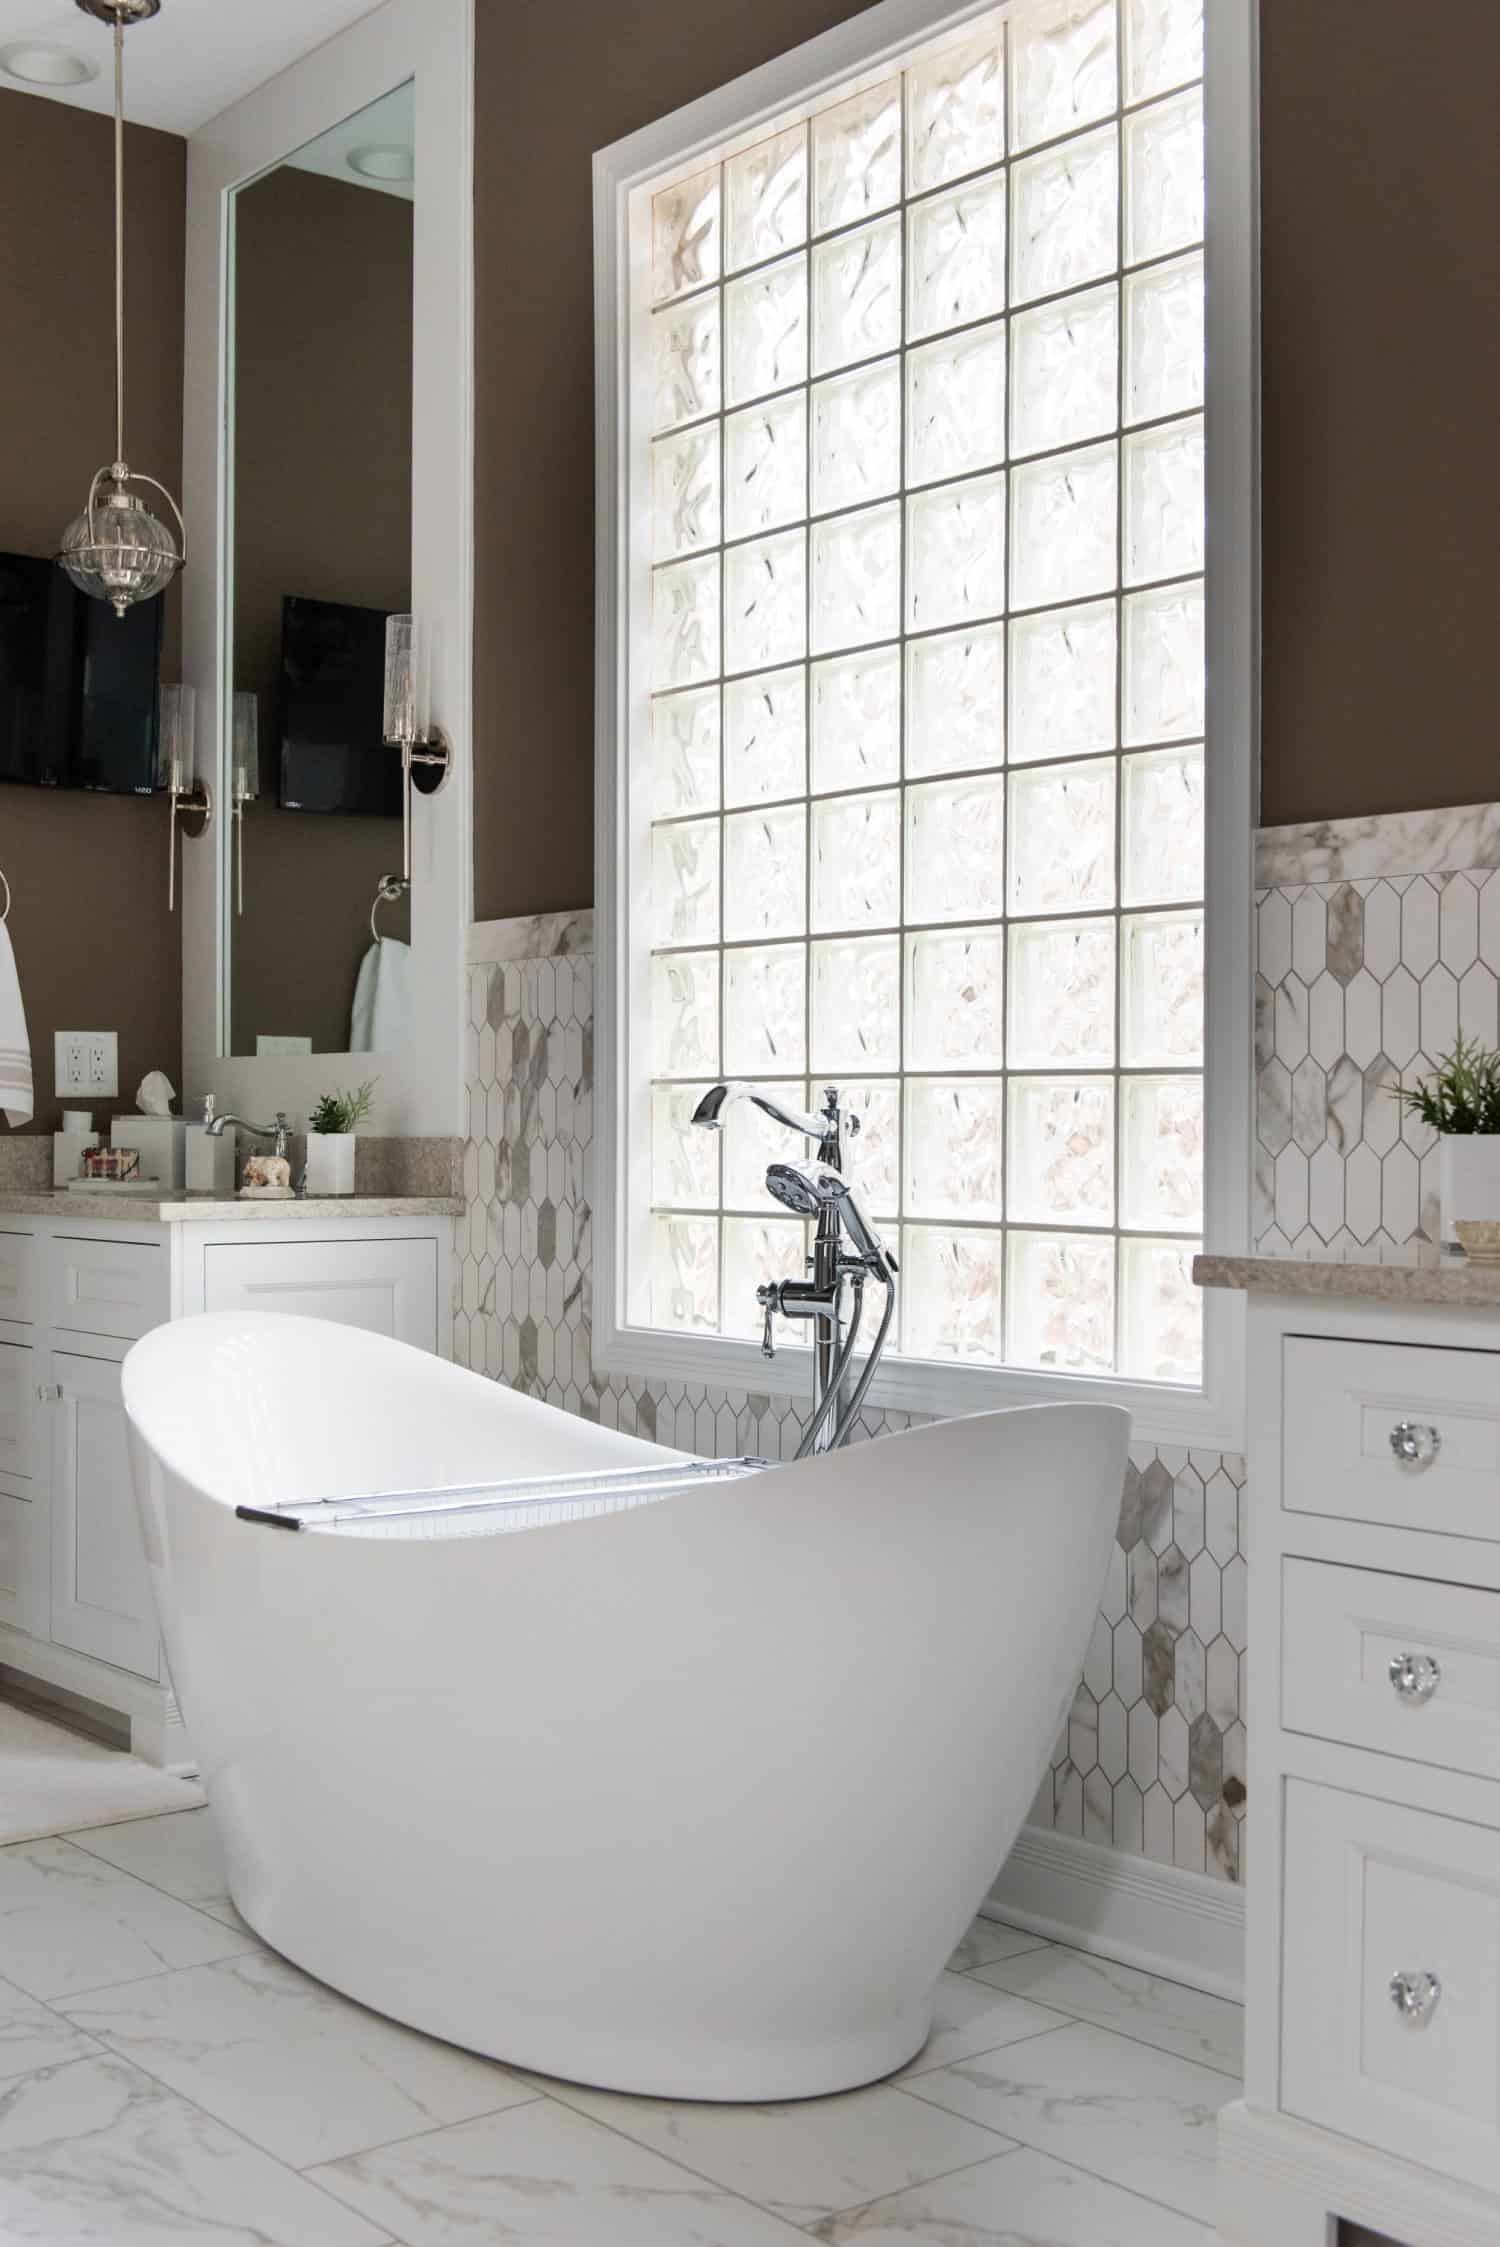 Nicholas Design Build | An oasis of relaxation found in a bathroom with brown walls, complete with a white bathtub.